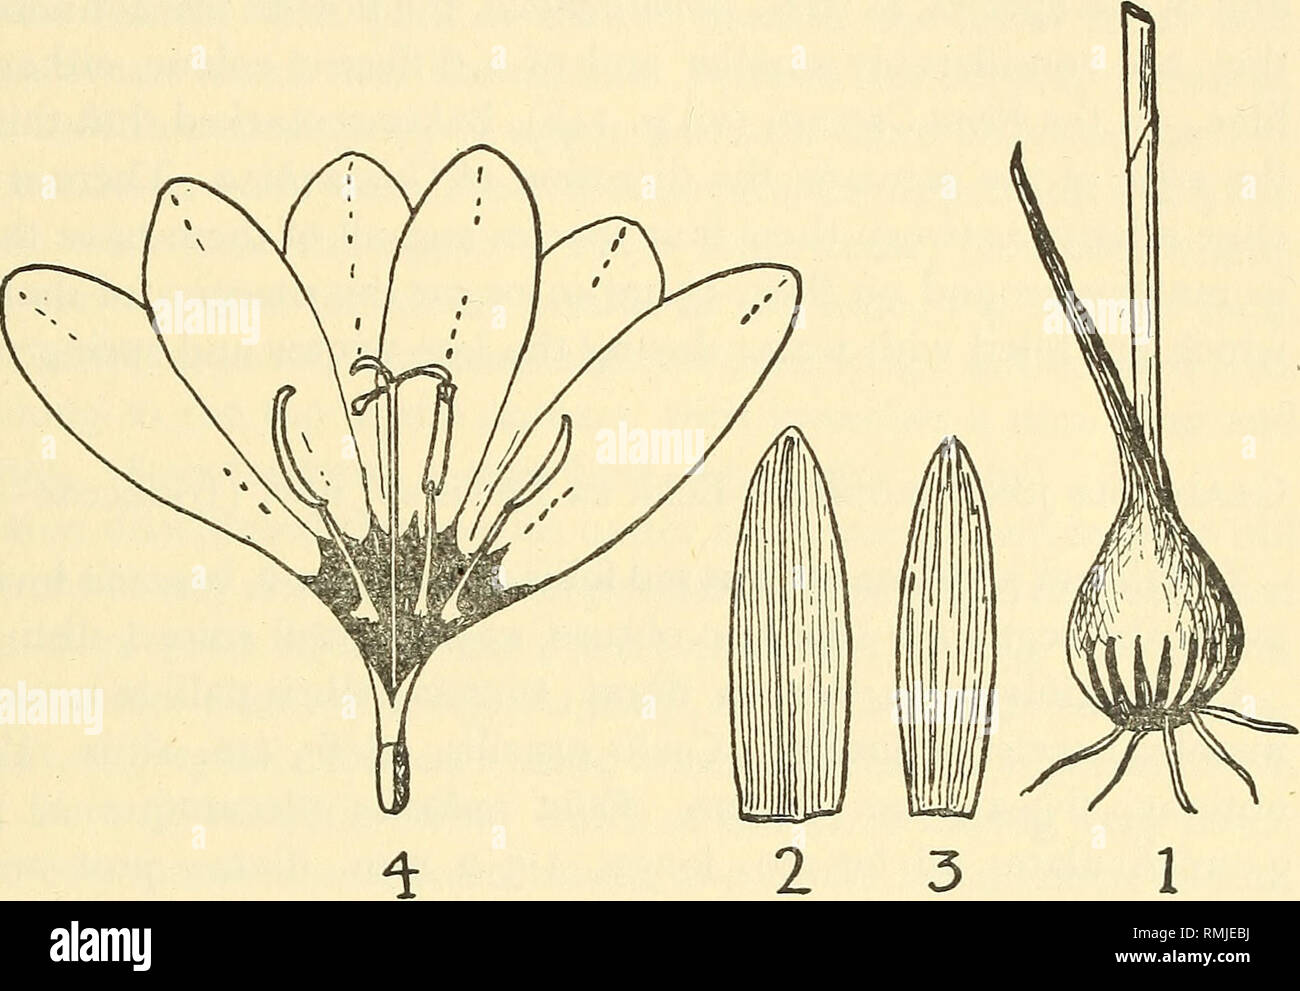 . Annals of the South African Museum = Annale van die Suid-Afrikaanse Museum. Natural history. Figure 4. Gladiolus symmetranthus Lewis. 1. Corm and base of stem. 2. Bract. 3. Bracteoles. 4. Flower, laid open. 5, Flower, side view, with upper part of the perianth lobes removed to show the stamens and style, X 2. All drawings natural size except where stated. Del. G.J. Lewis. Leighton, s. n. (Bolus Herb.), Sept.; Elsenburg, Grant 2512 (Bolus Herb.), Sept.; between Paarlberg and Paardeberg, Drege 8457 (Geneva), Aug.—Sept. Corm globose or subglobose, 1-1*5 cm- diam.; tunics coarse, usually con- ce Stock Photo